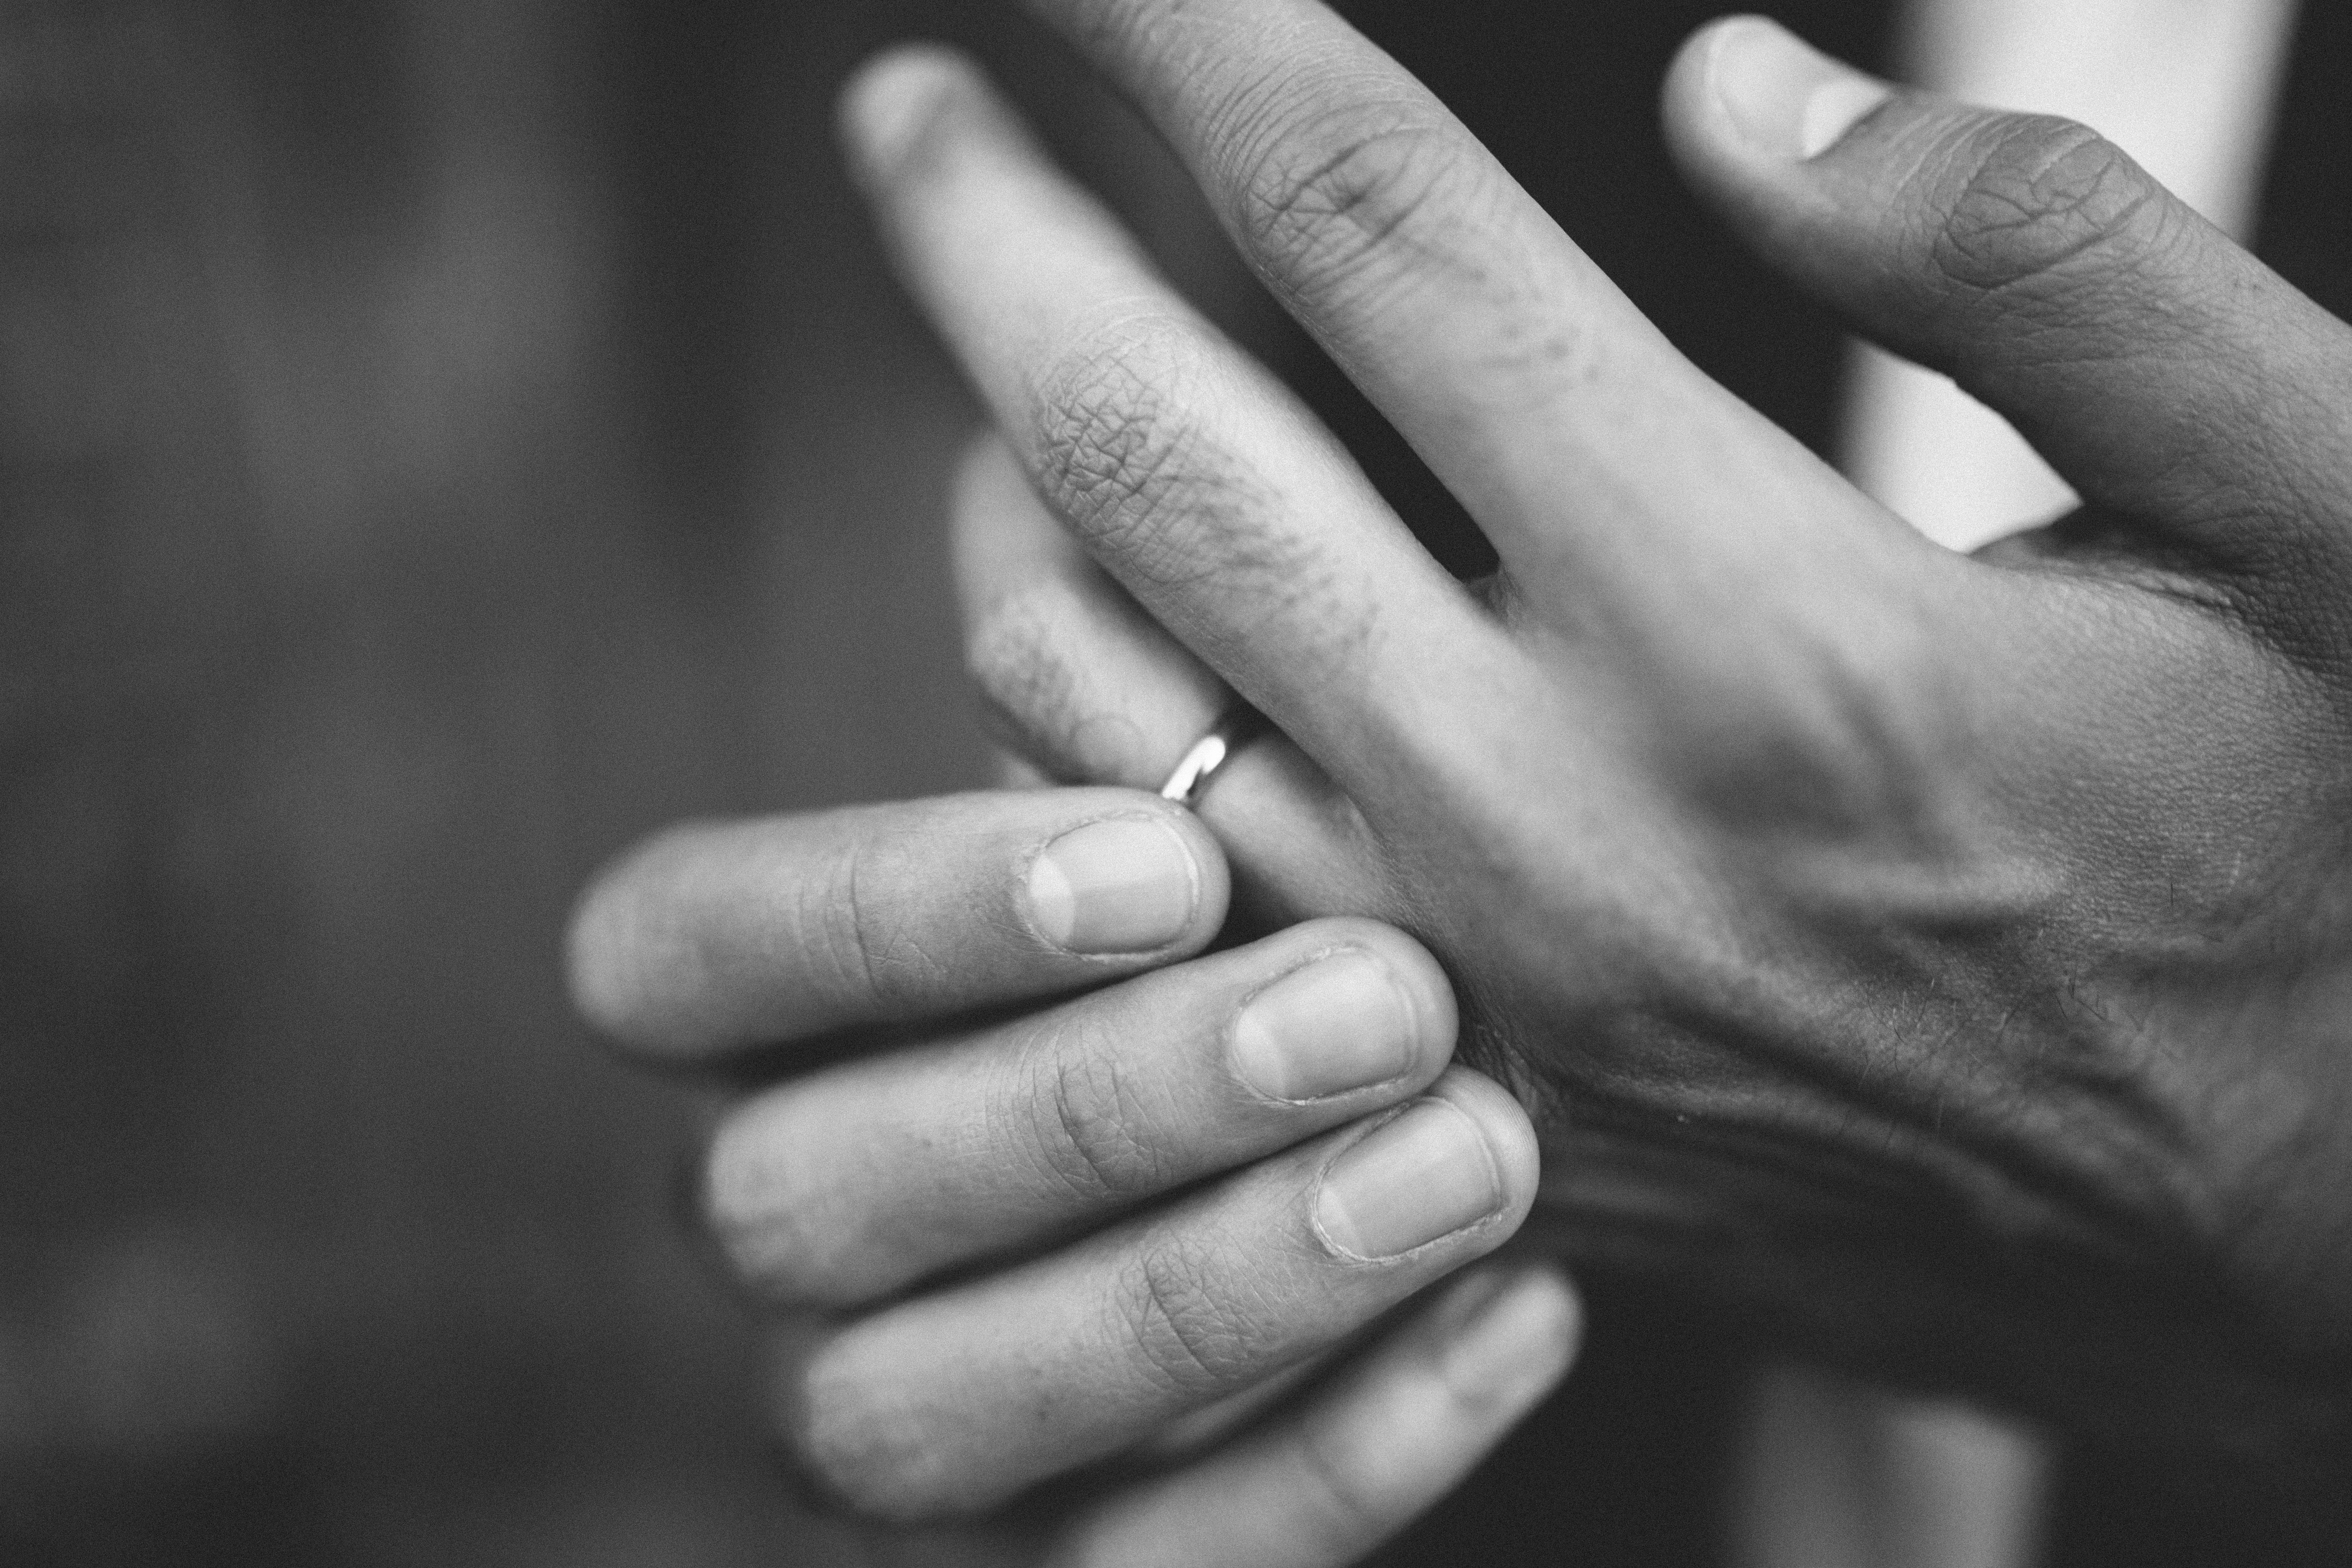 miscellanea, miscellaneous, hands, ring, bw, chb, fingers